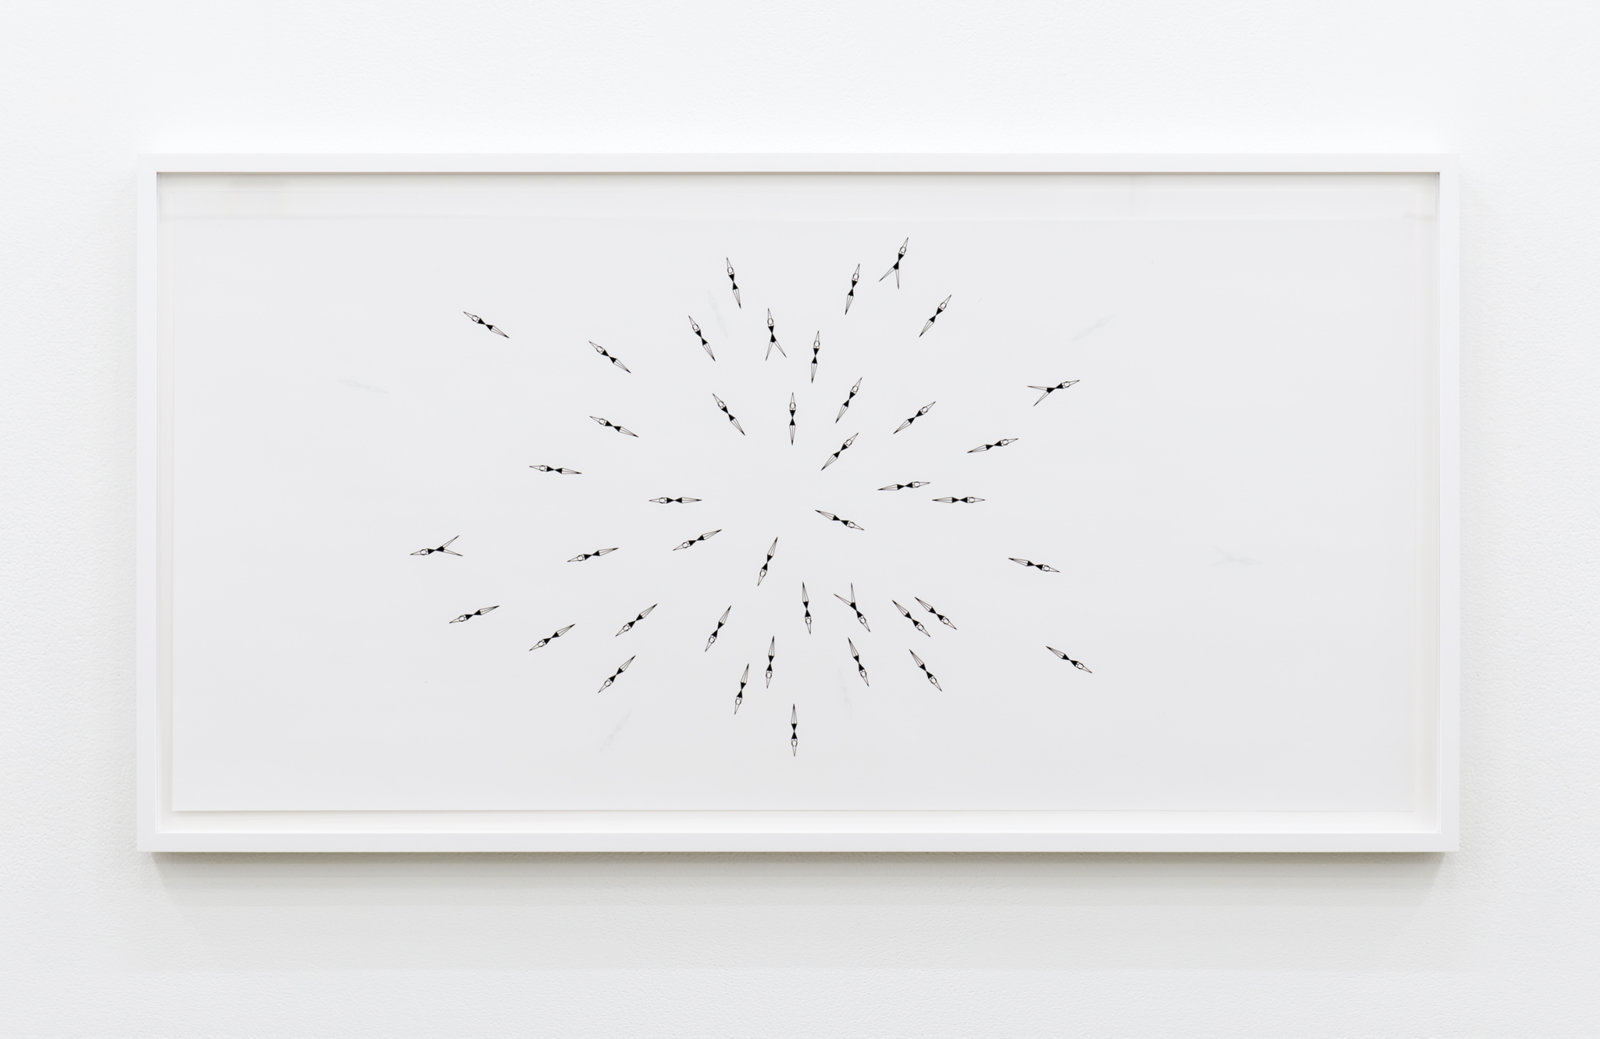 Janice Kerbel, Sync (Explode), 2017, double sided silkscreen print on paper, 33 x 17 in. (84 x 42 cm)